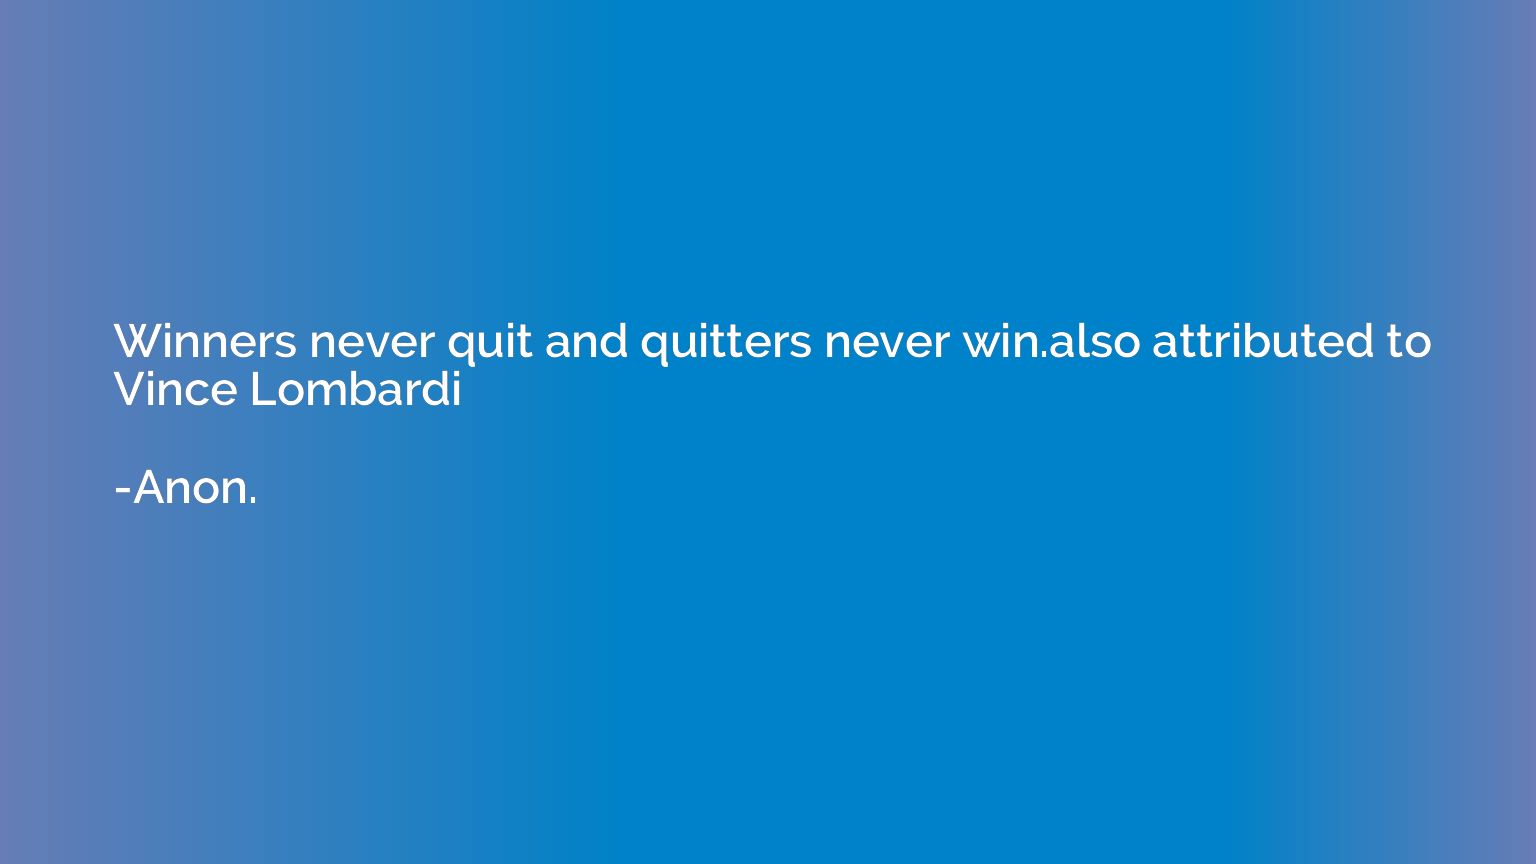 Winners never quit and quitters never win.also attributed to